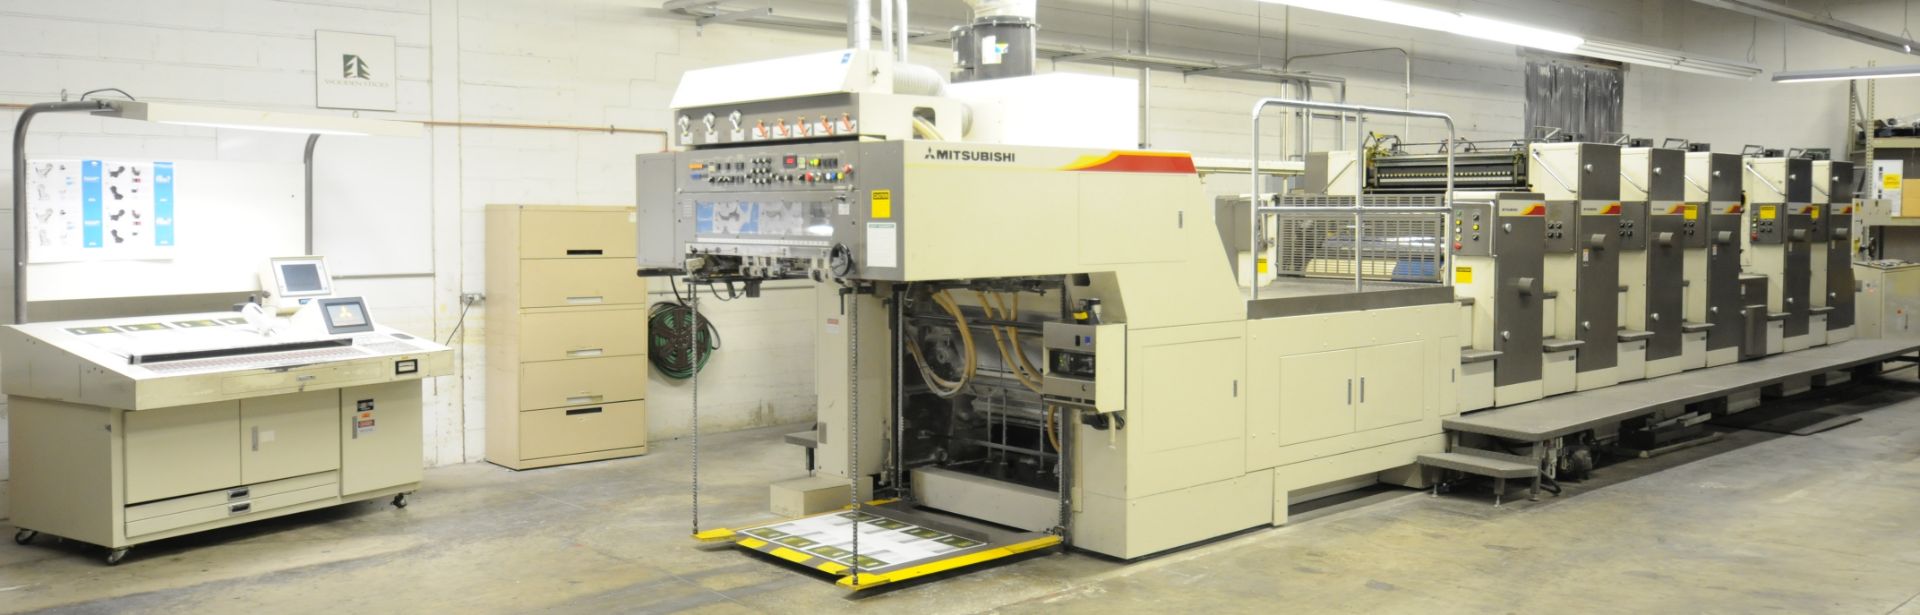 MITSUBISHI (2000) 3FR-5 (5) COLOR, 40"X28" SHEET-FEED OFFSET PERFECTOR PRESS WITH FULLY INTEGRATED - Image 3 of 13